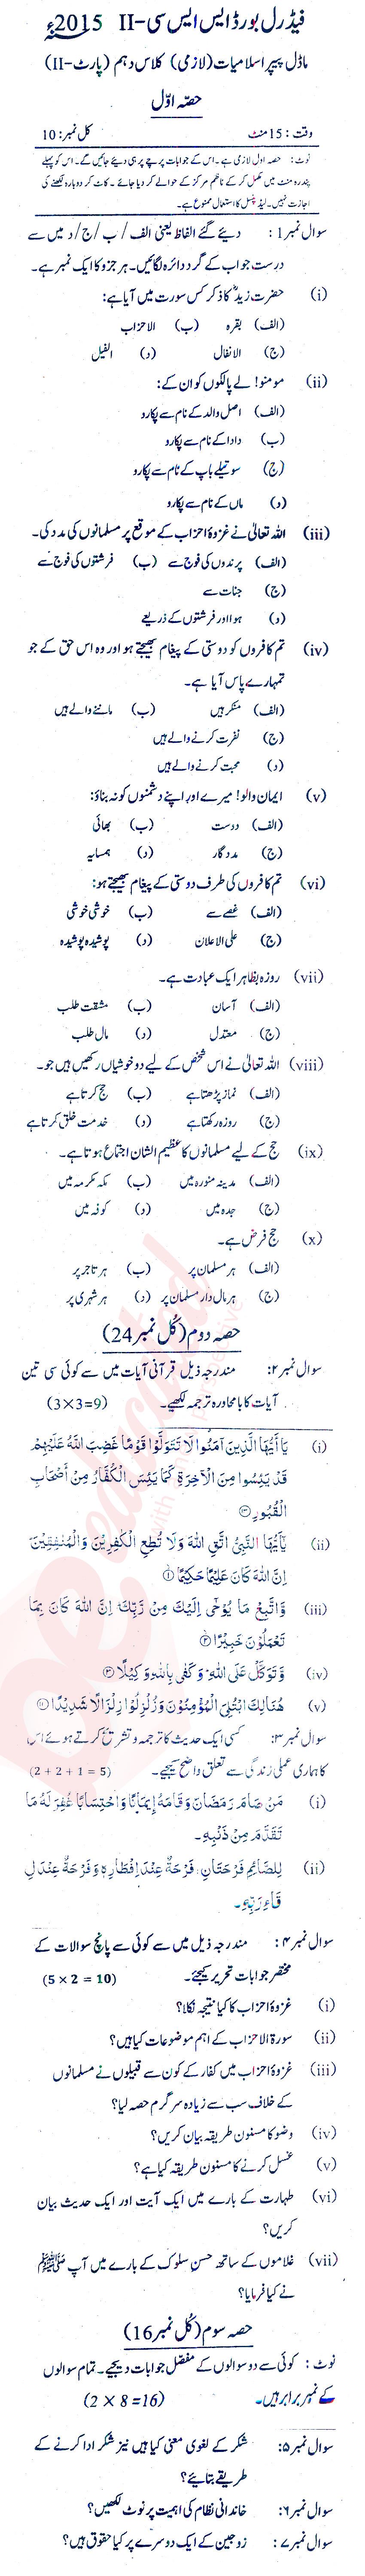 Islamiat (Compulsory) 10th class Past Paper Group 1 Federal BISE  2015